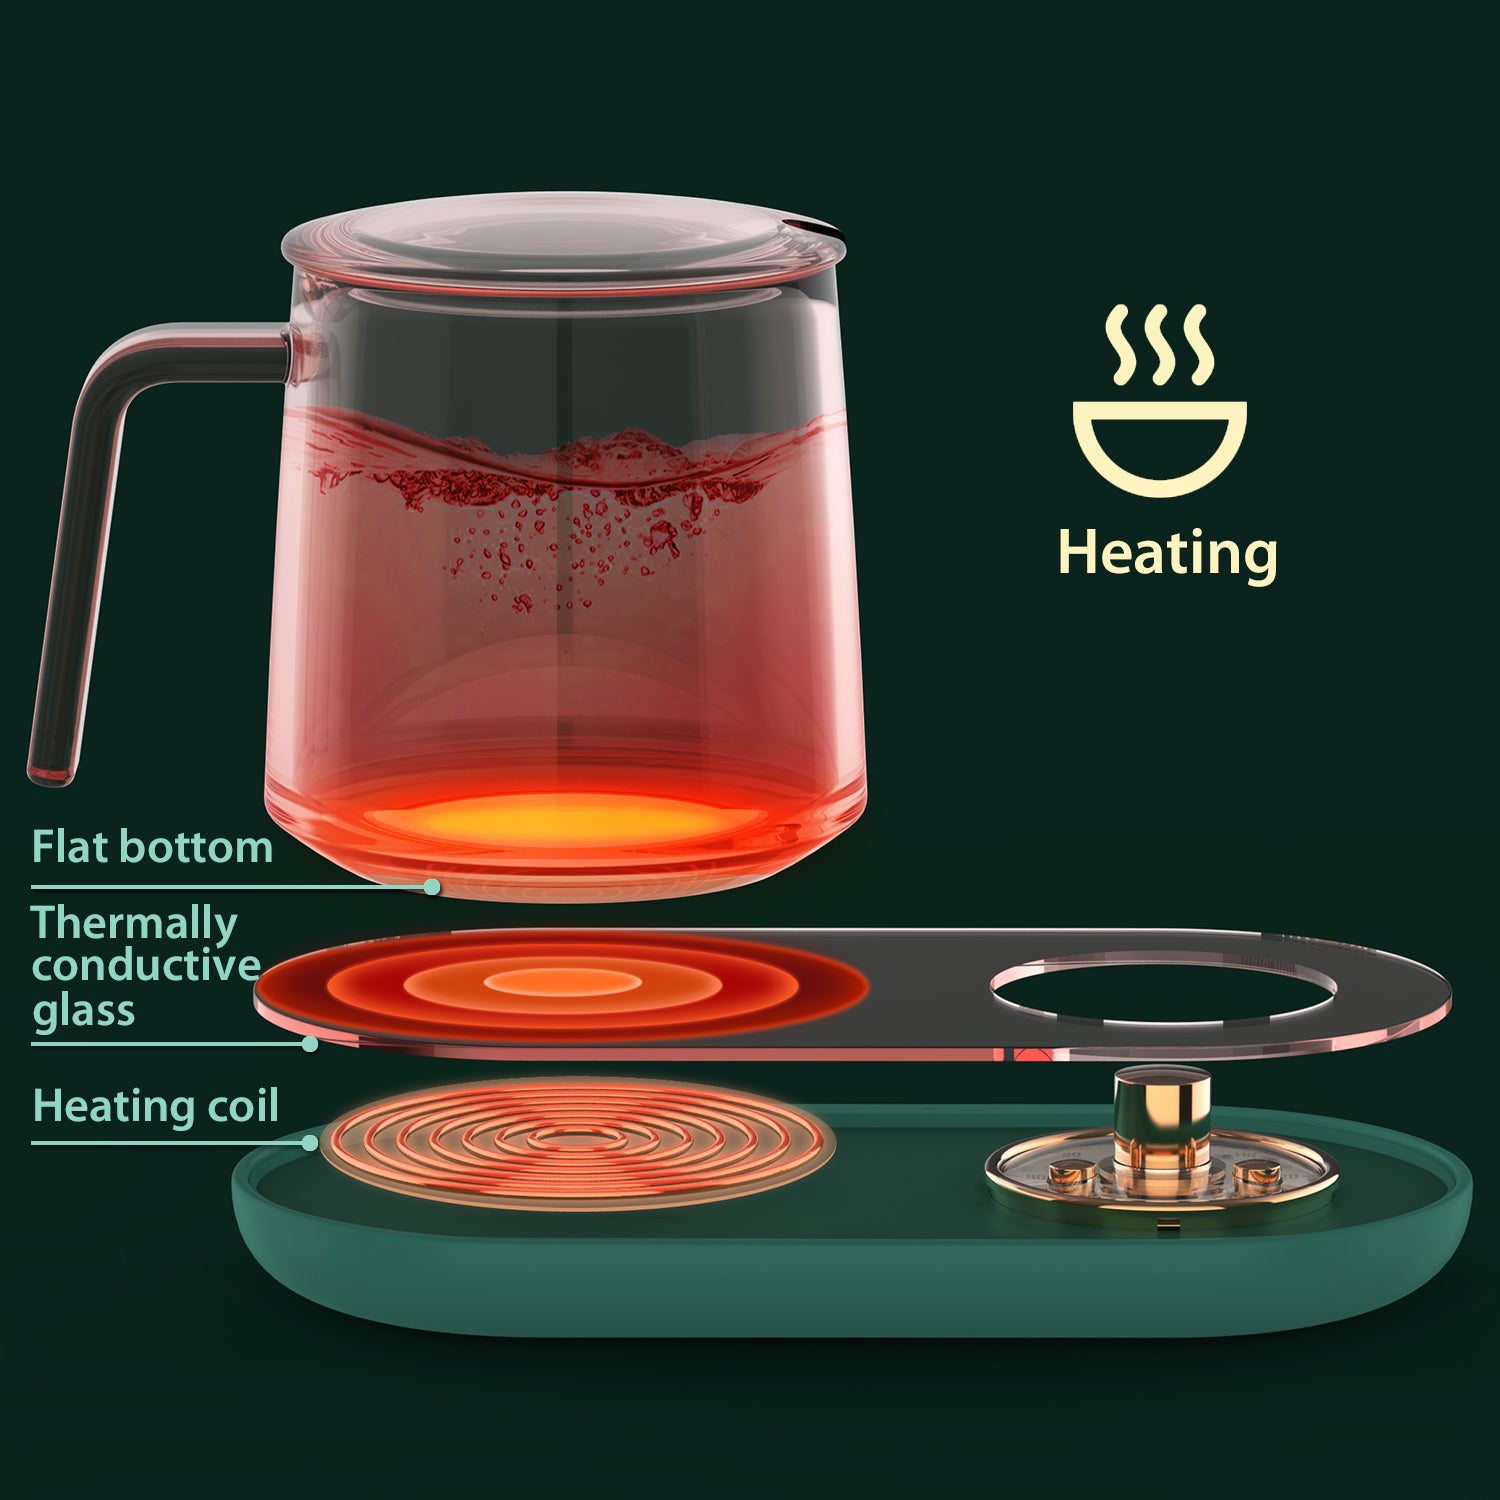 Coffee Mug Warmer for Desk, Coffee Cup Warmer with Auto Shut Off for Home  Office, Smart Electric Warmer Plate for Warming Coffee, Milk and Tea-Green  